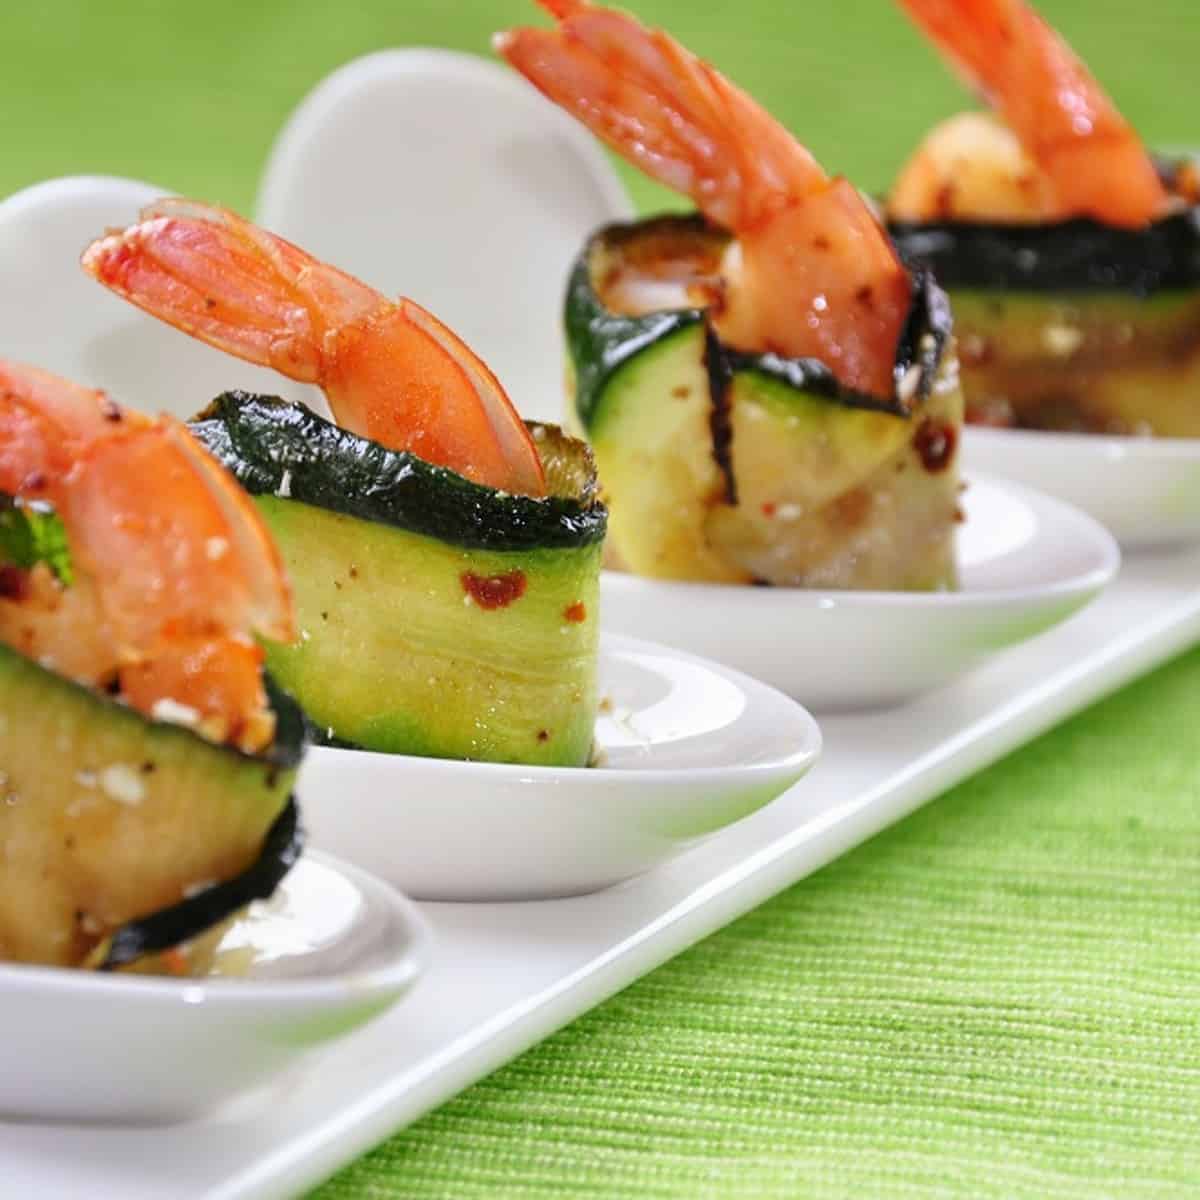 Chunks of juicy shrimp and ribbons of grilled zucchini, artfully arranged on skewers and ready to be devoured